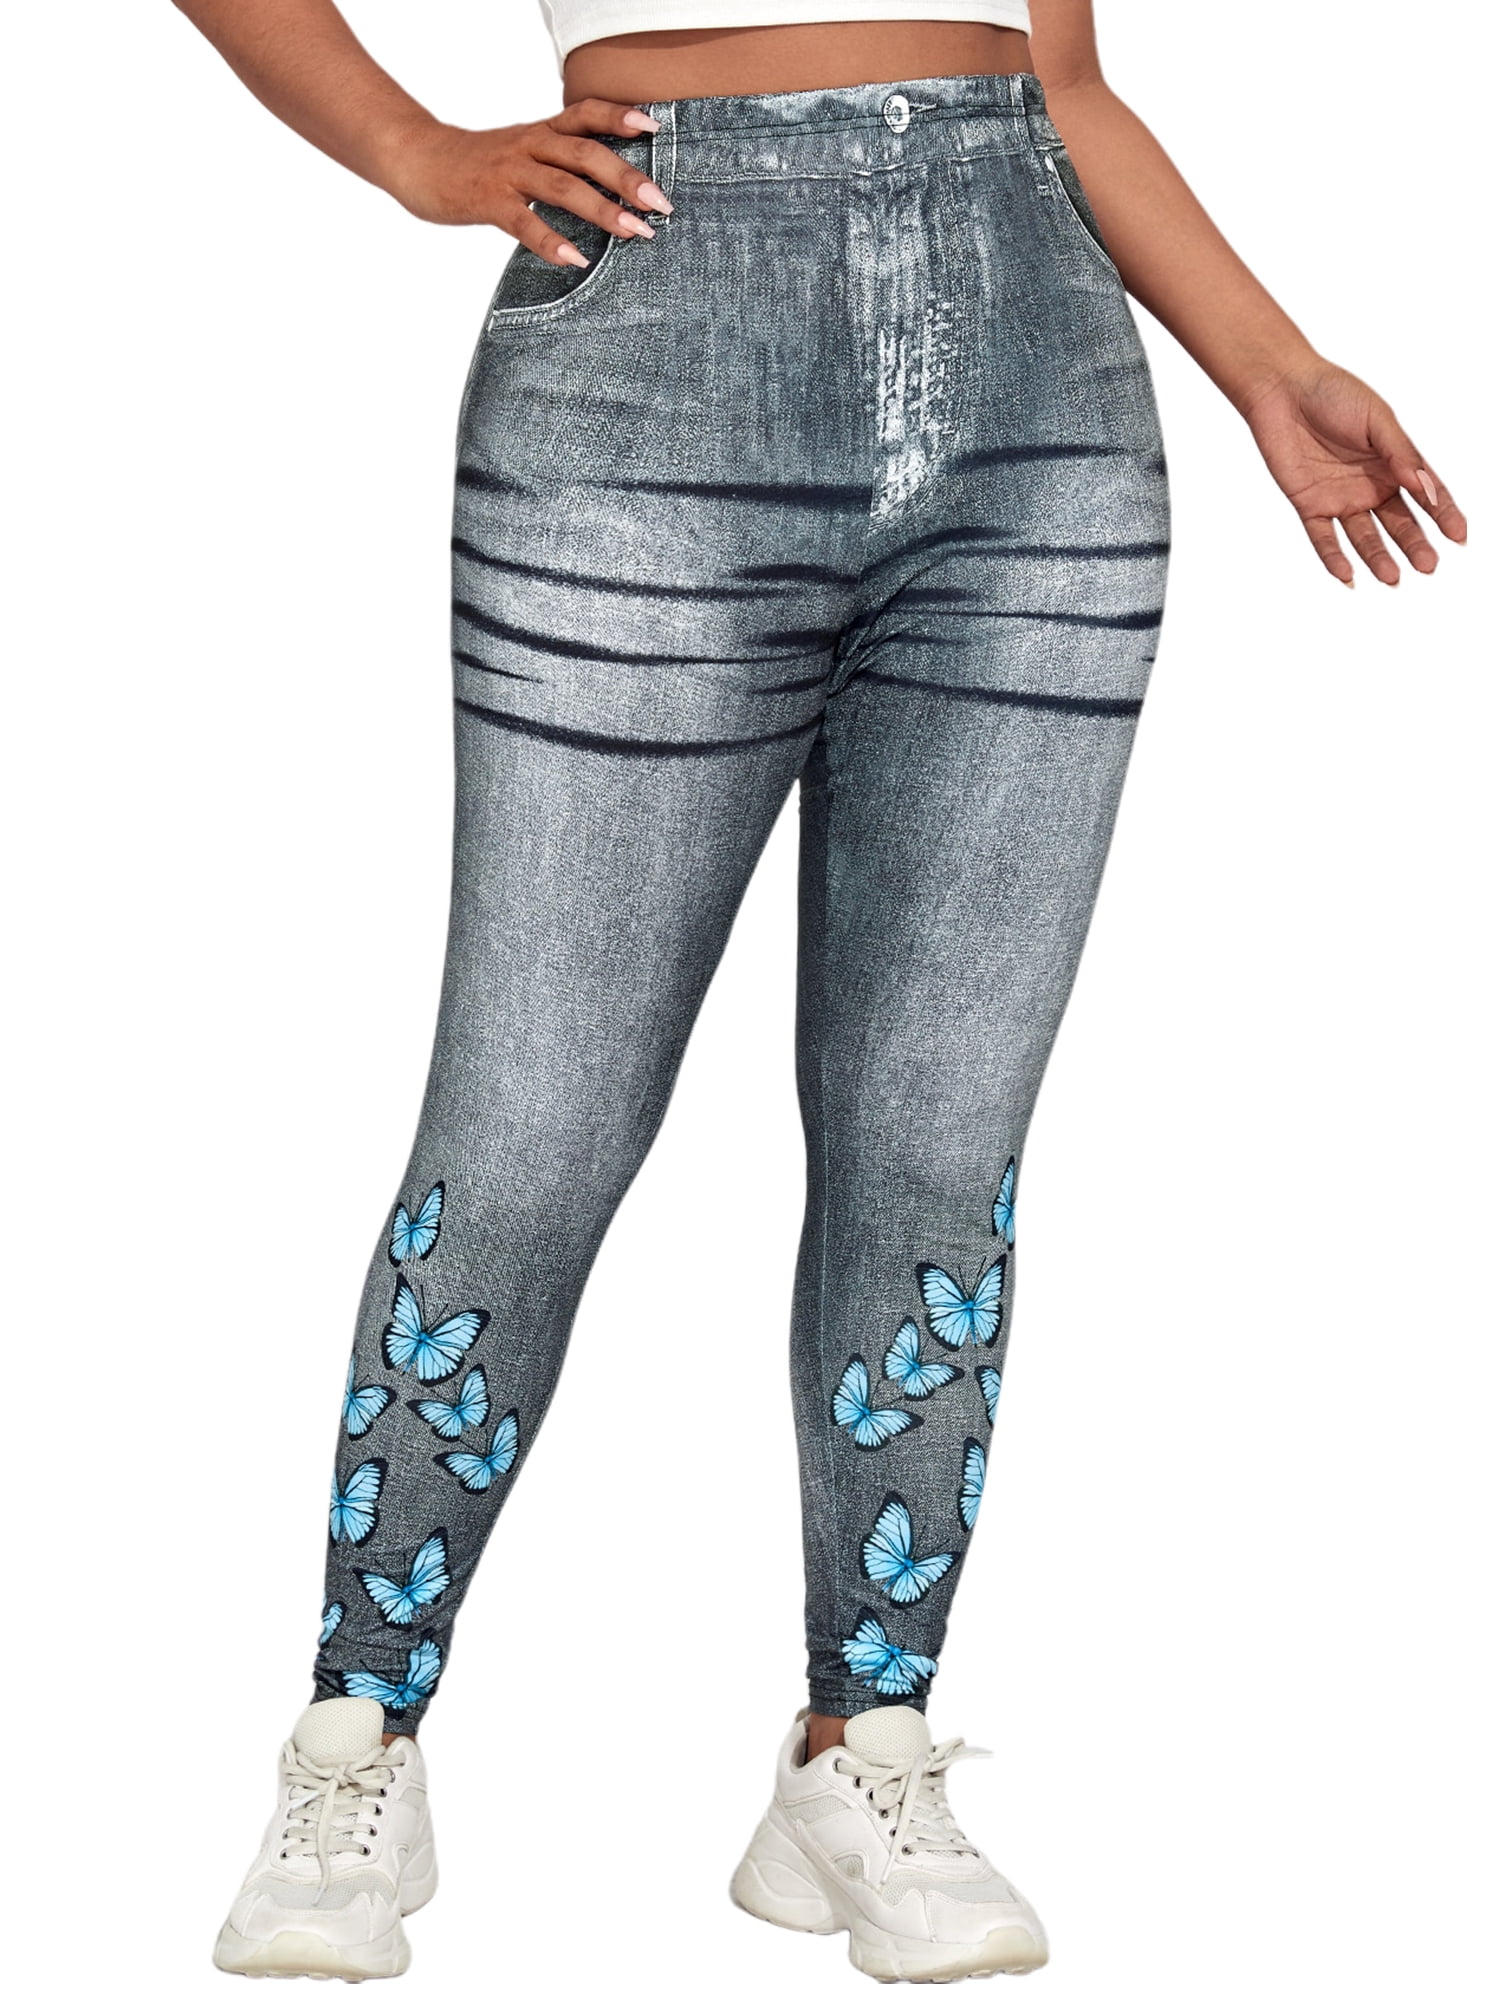 Frontwalk Jean Leggings for Women Plus Size Butterfly Printed Fake Denim  High Waisted Yoga Pants Stretch Faux Jean Look Jeggings Tights Gray Blue 5XL